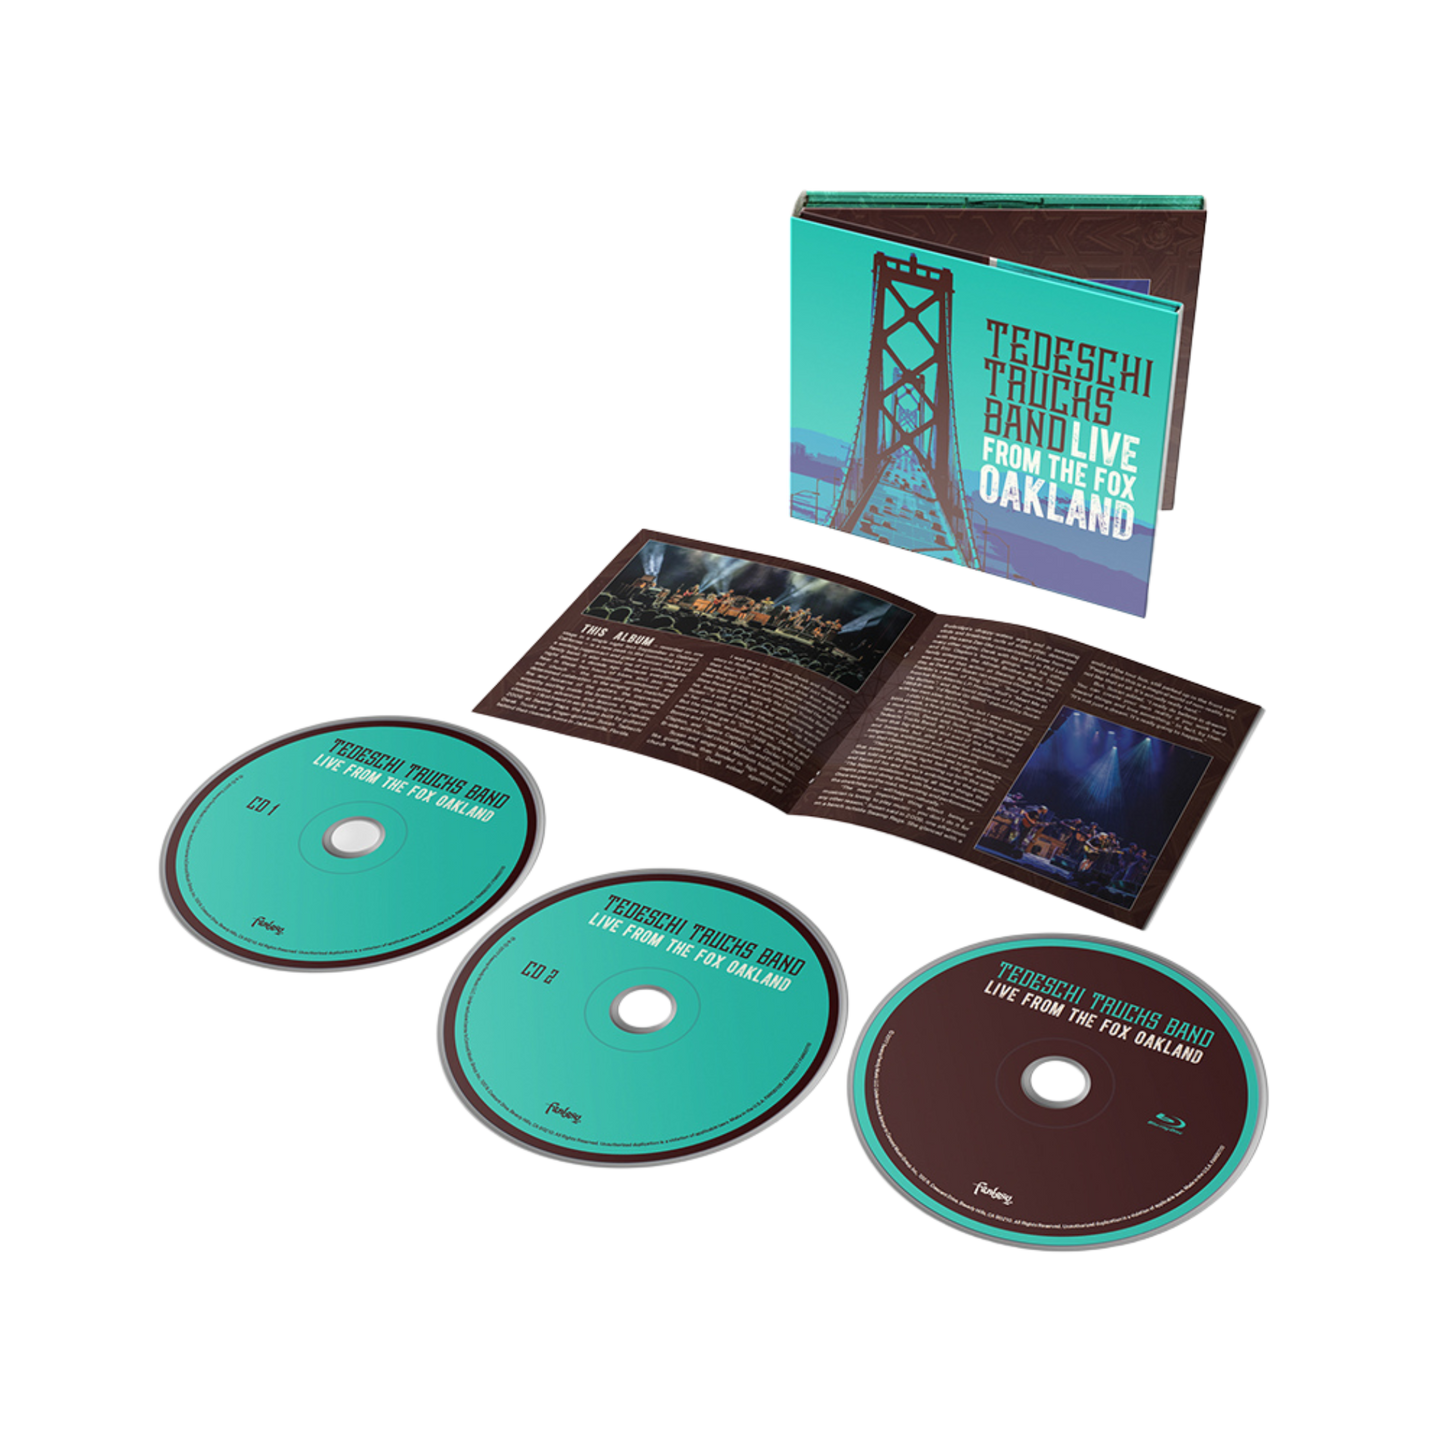 Live From The Fox Oakland - CD/Blu-ray Set